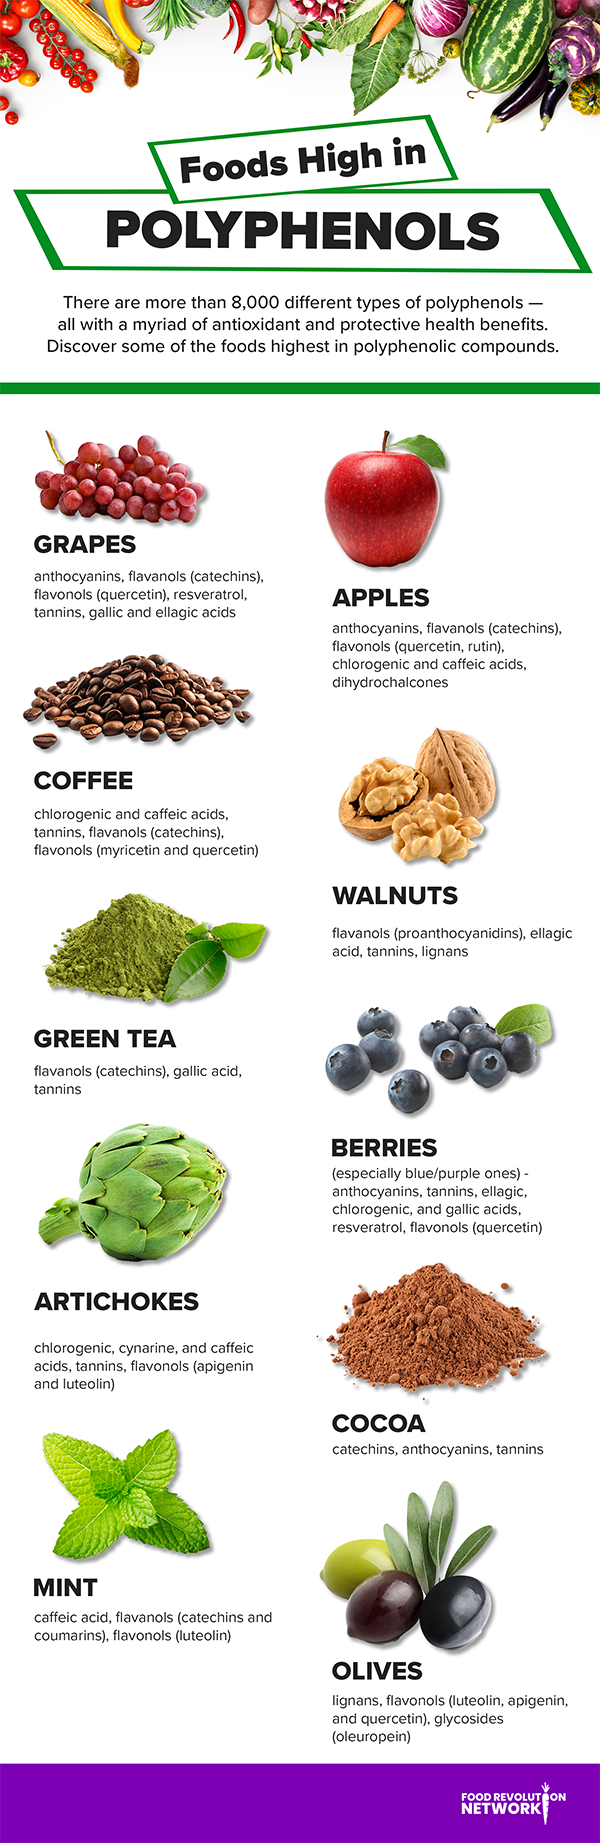 Foods High in Polyphenols Infographic